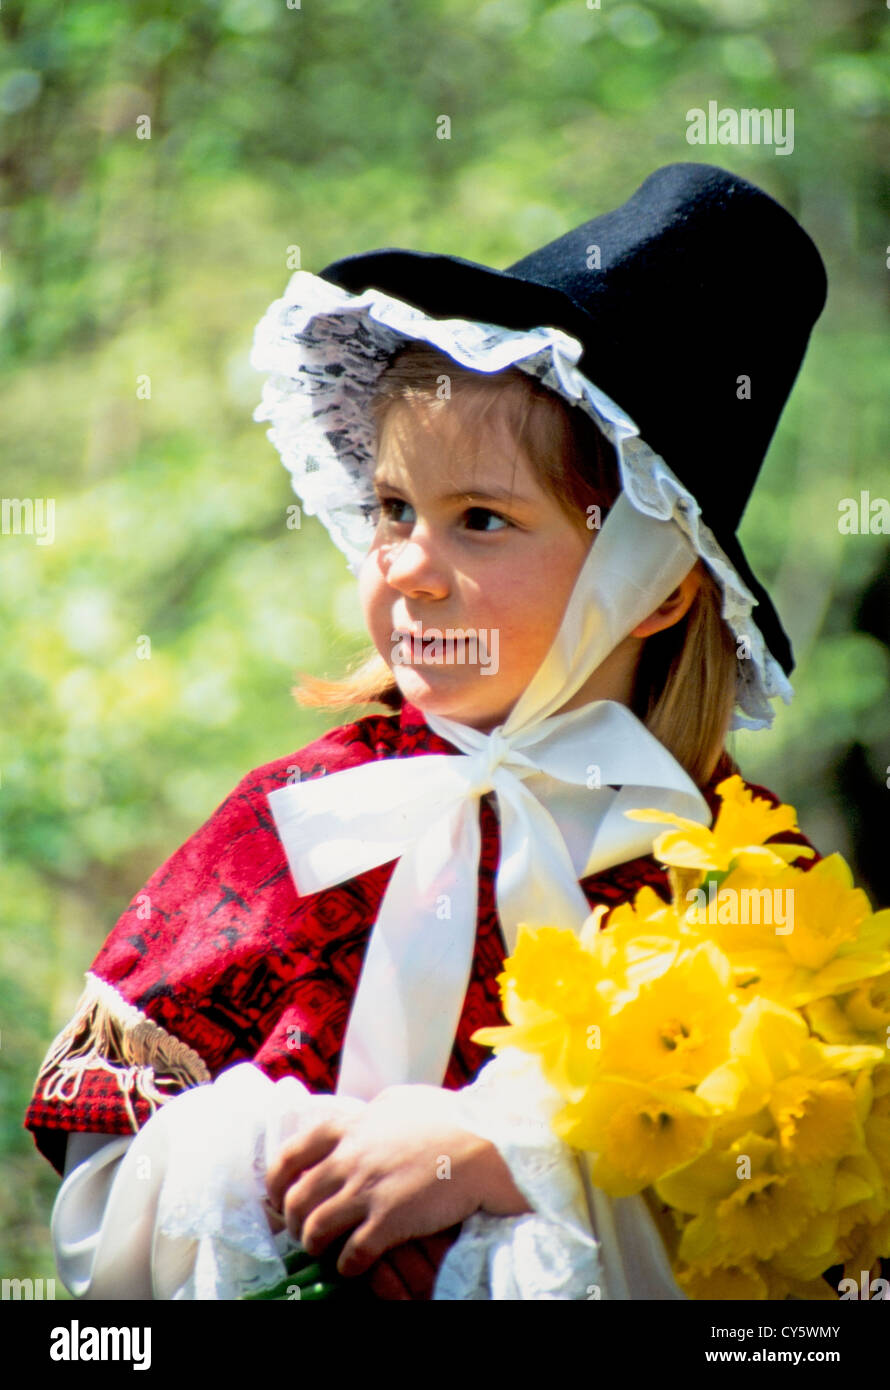 YOUNG GIRL WEARING TRADITIONAL WELSH NATIONAL COSTUME Stock Photo